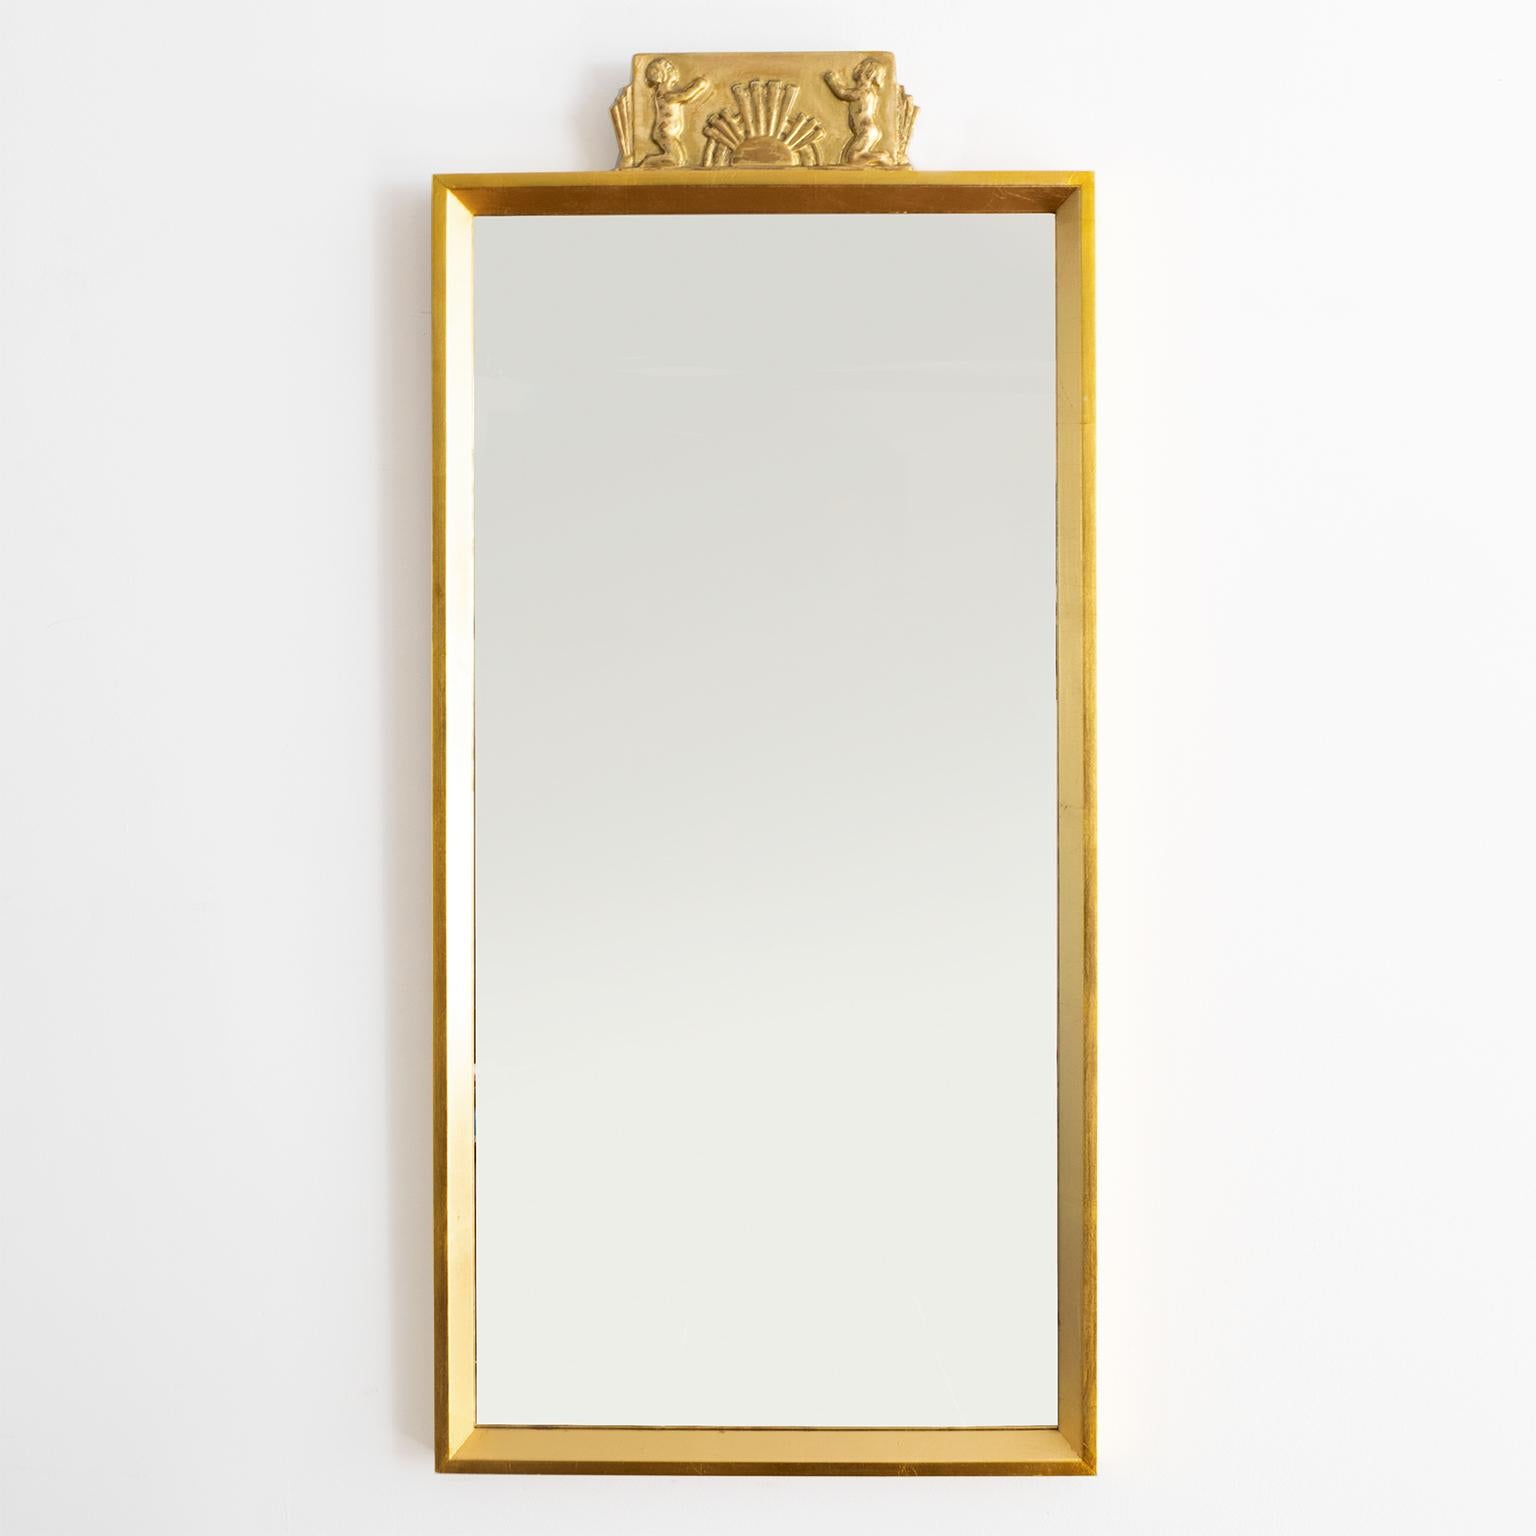 Scandinavian Modern wall mirror with carved giltwood element showing children flanking a rising sun. 

Measures: Height 39”, width 18”, depth 1.5”.